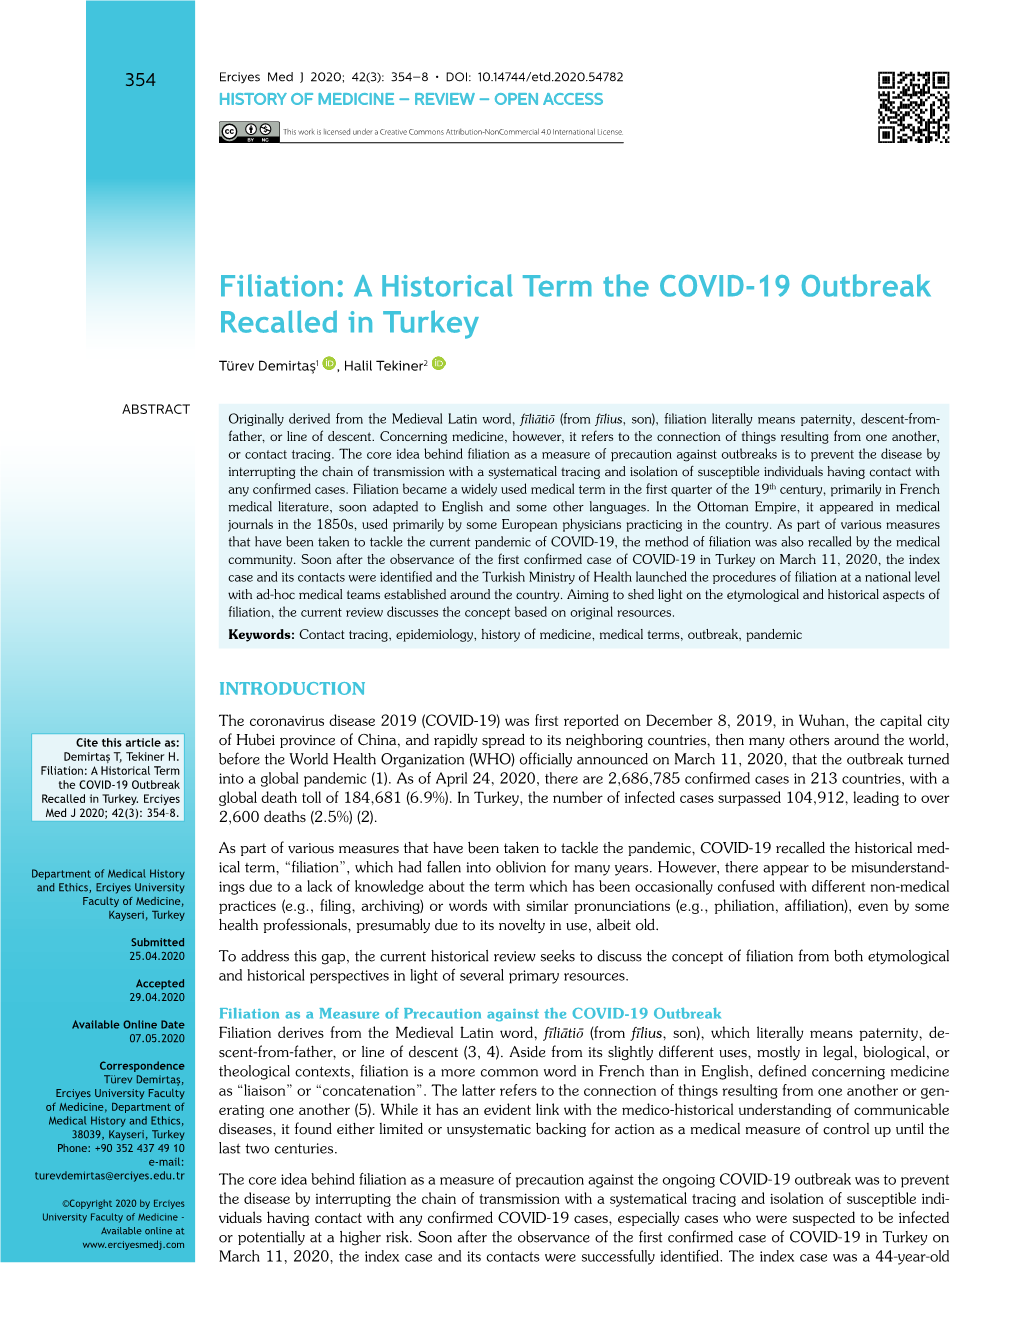 Filiation: a Historical Term the COVID-19 Outbreak Recalled in Turkey